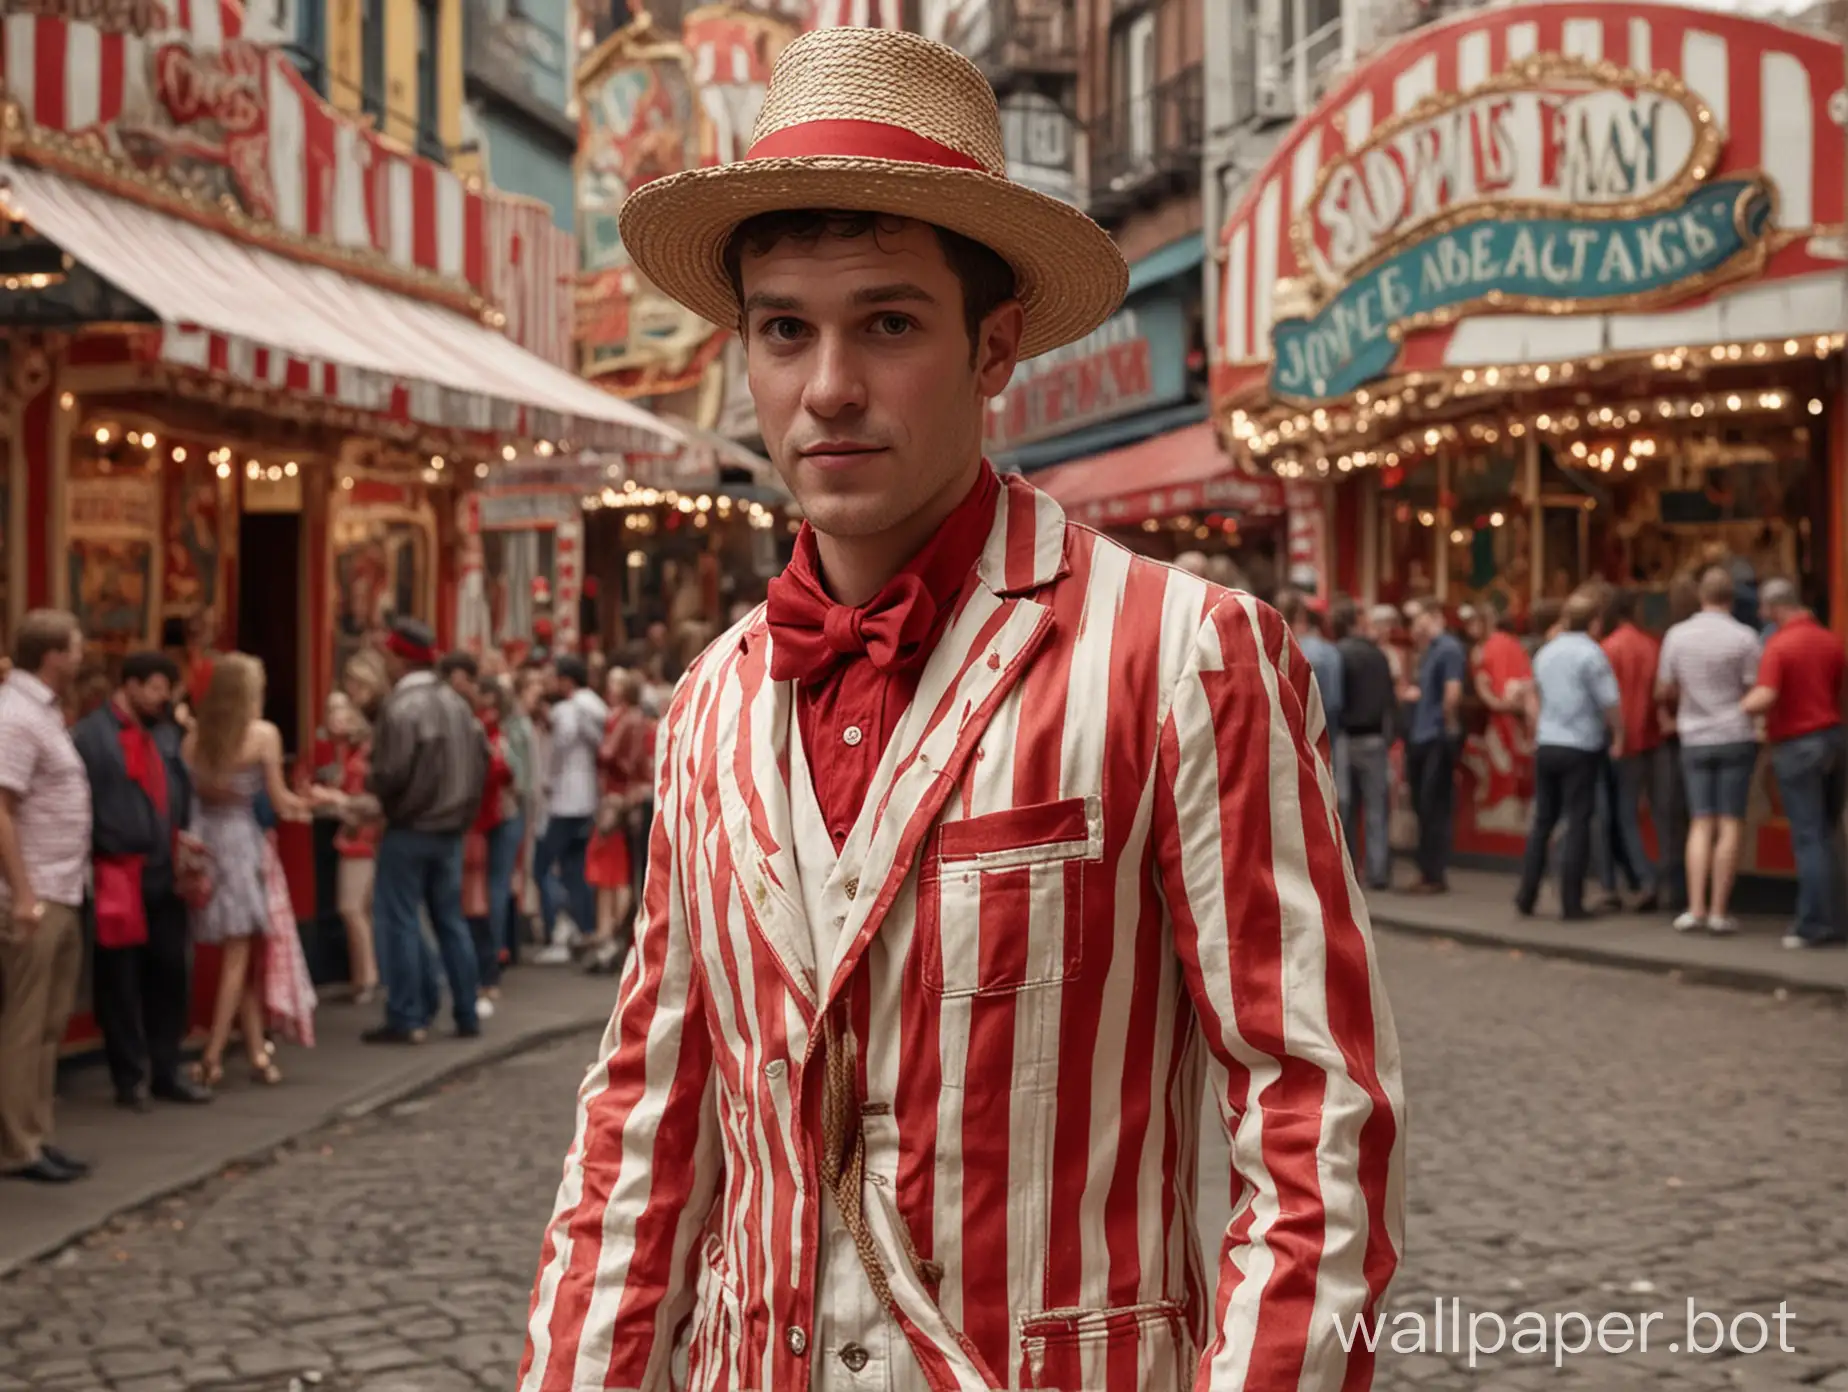 A carnival barker, dressed in red and white striped jacket and straw boater, attempts to attract patrons to his funfair attraction in sideshow alley. Sharp image, detailed features, high definition, colourful.